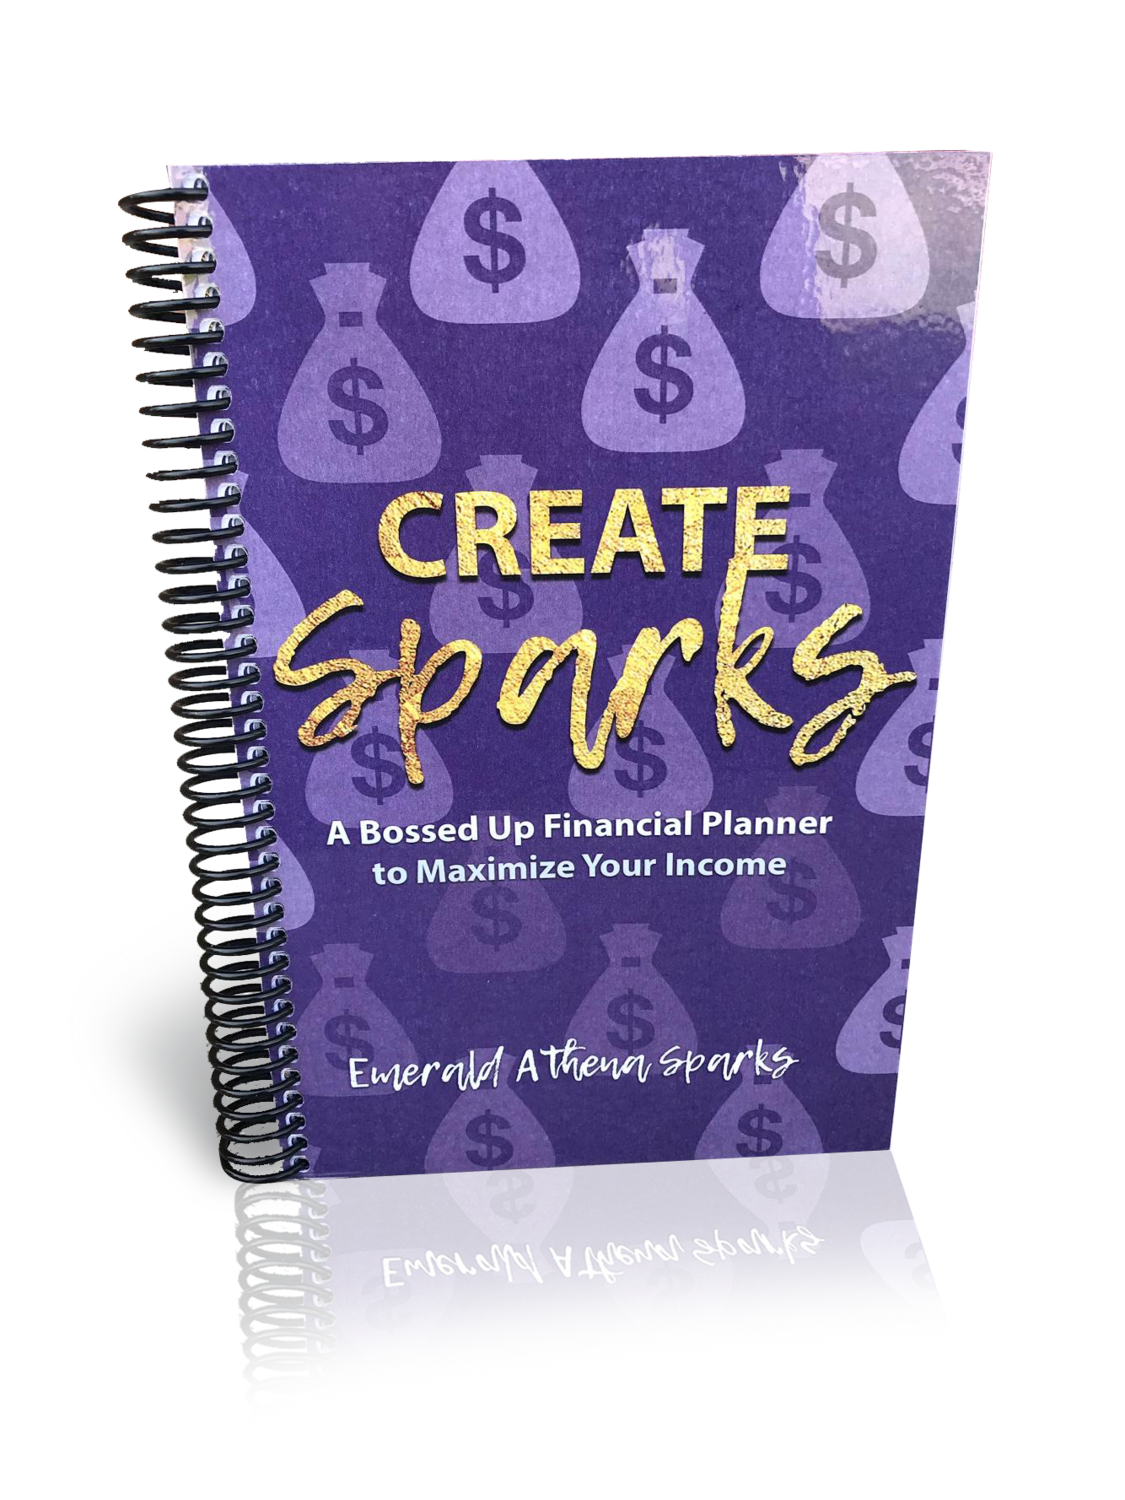 Create Sparks: A Bossed Up Financial Planner to Maximize Your Income